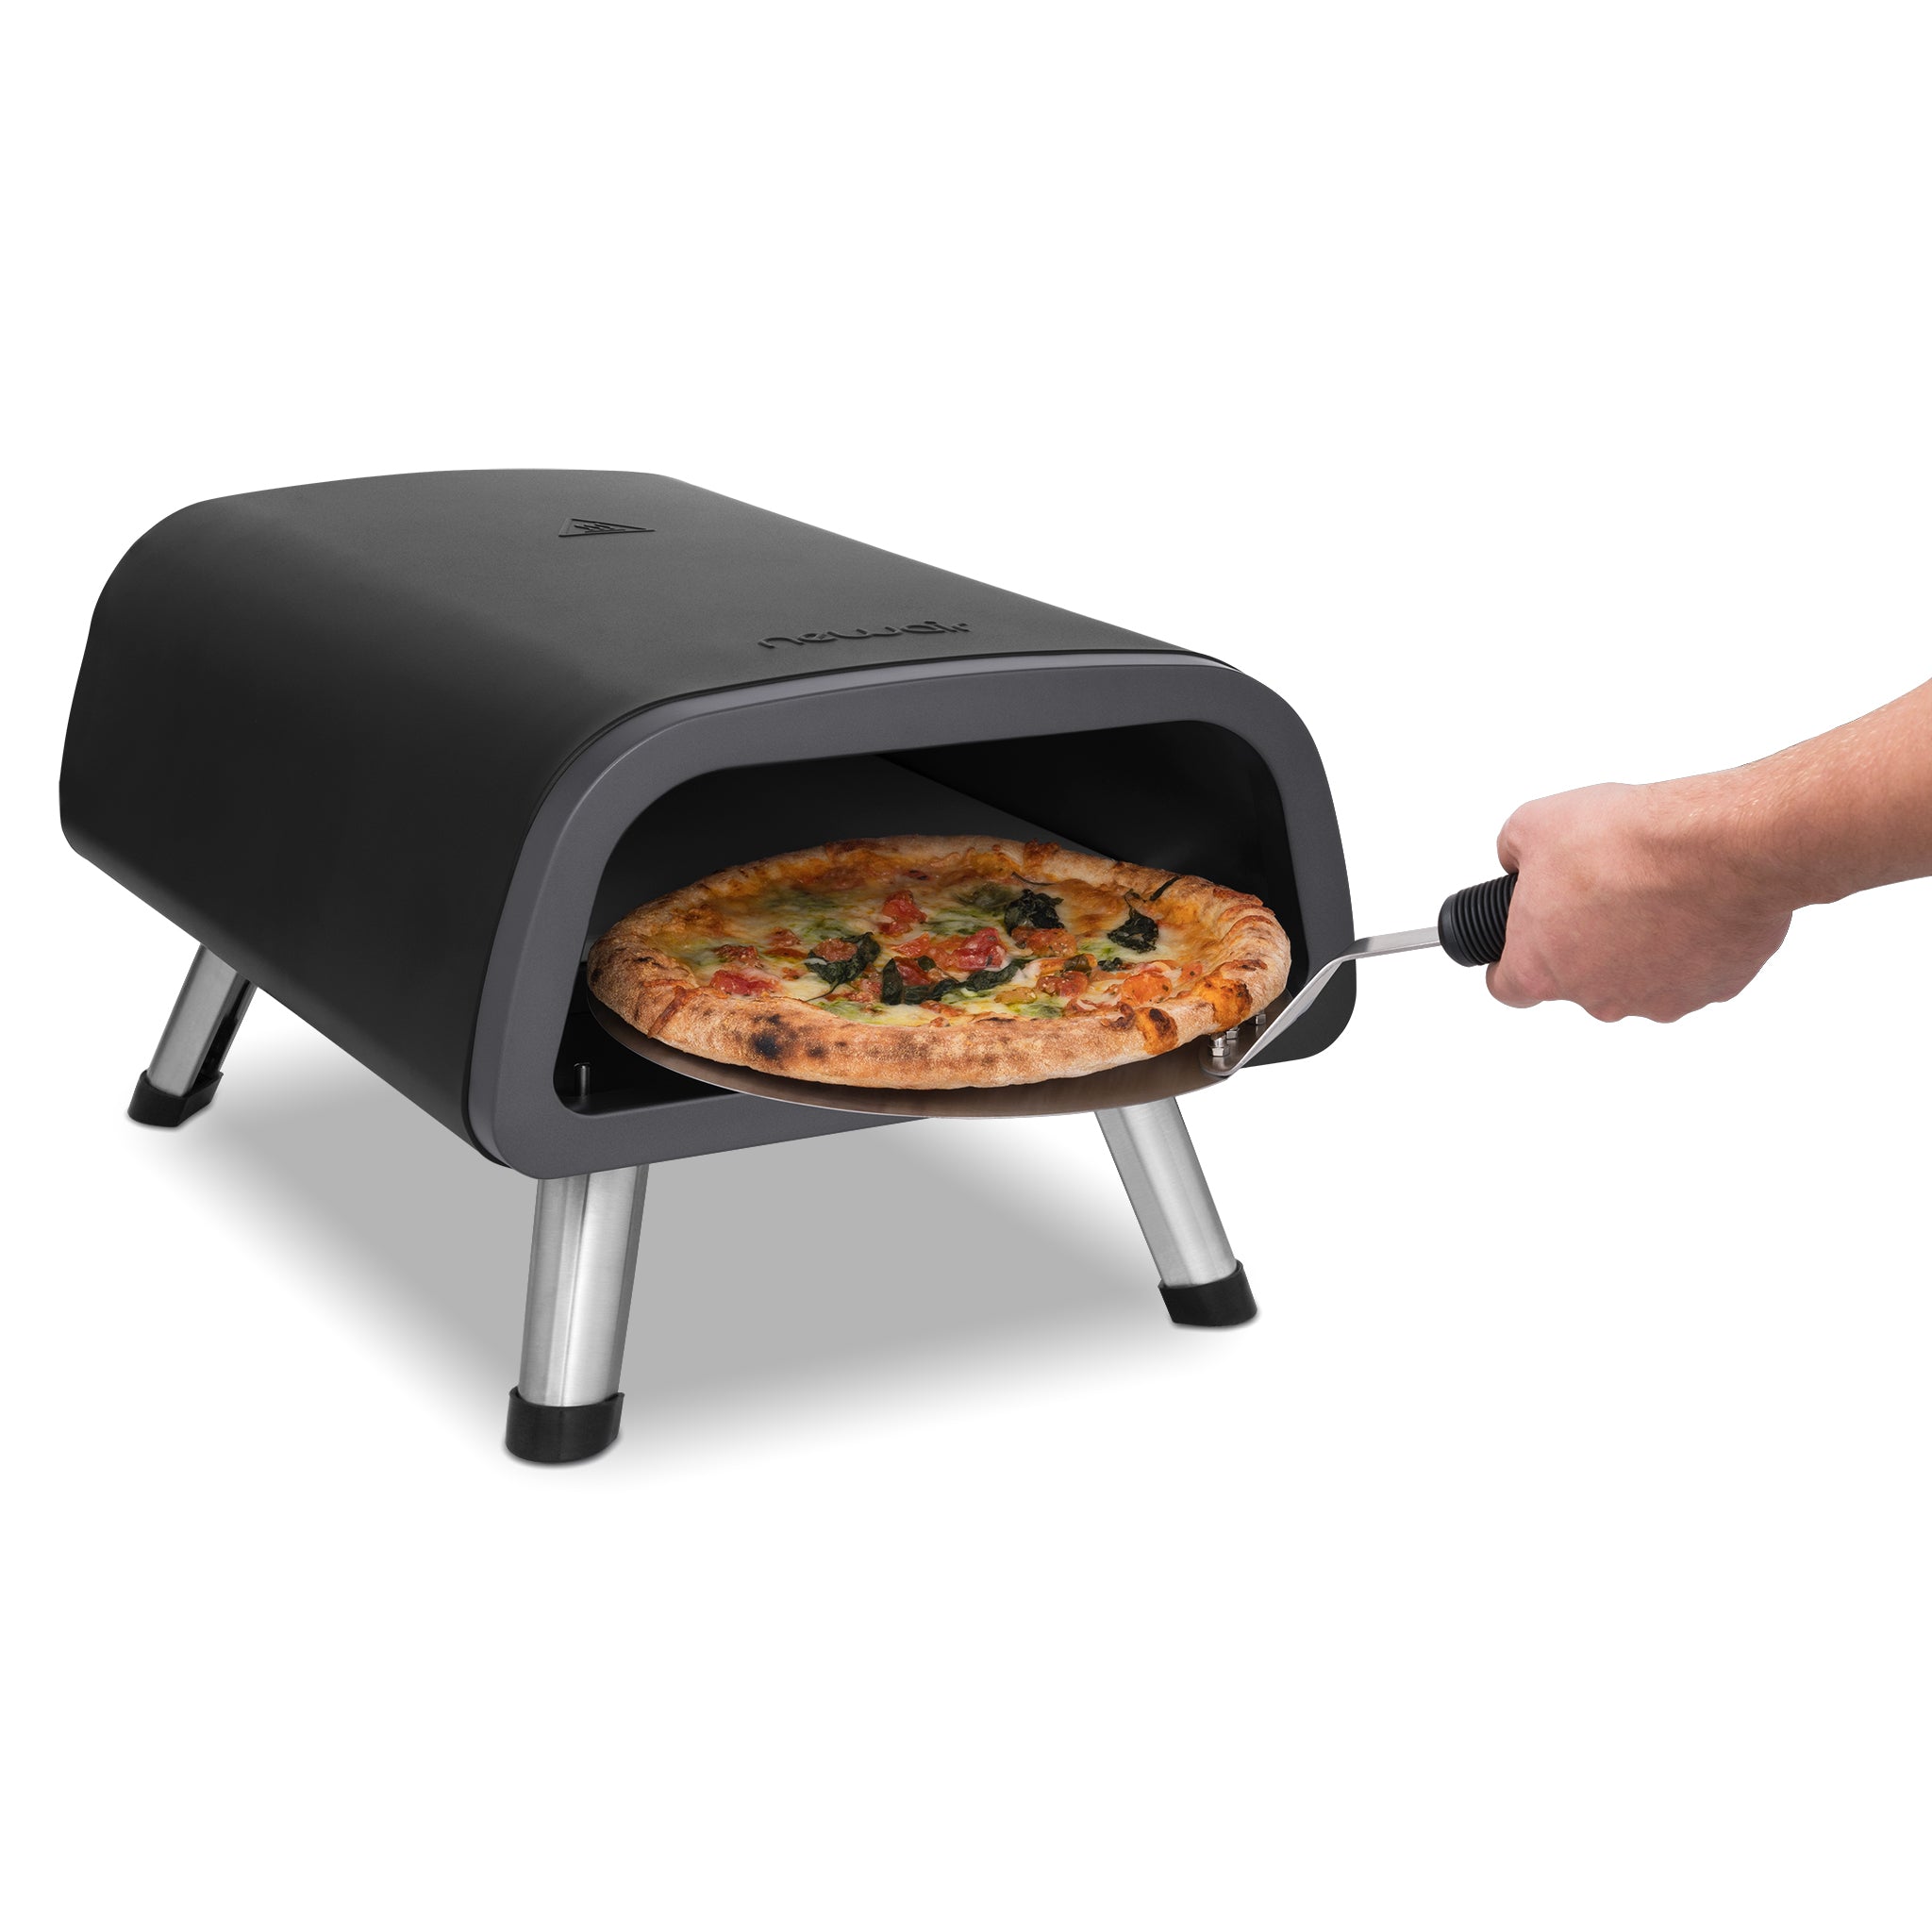 NewAir 12 Portable Electric Indoor and Outdoor Pizza Oven with Accessory Kit, Temperature Control Knob, 1850W Dual-Heating